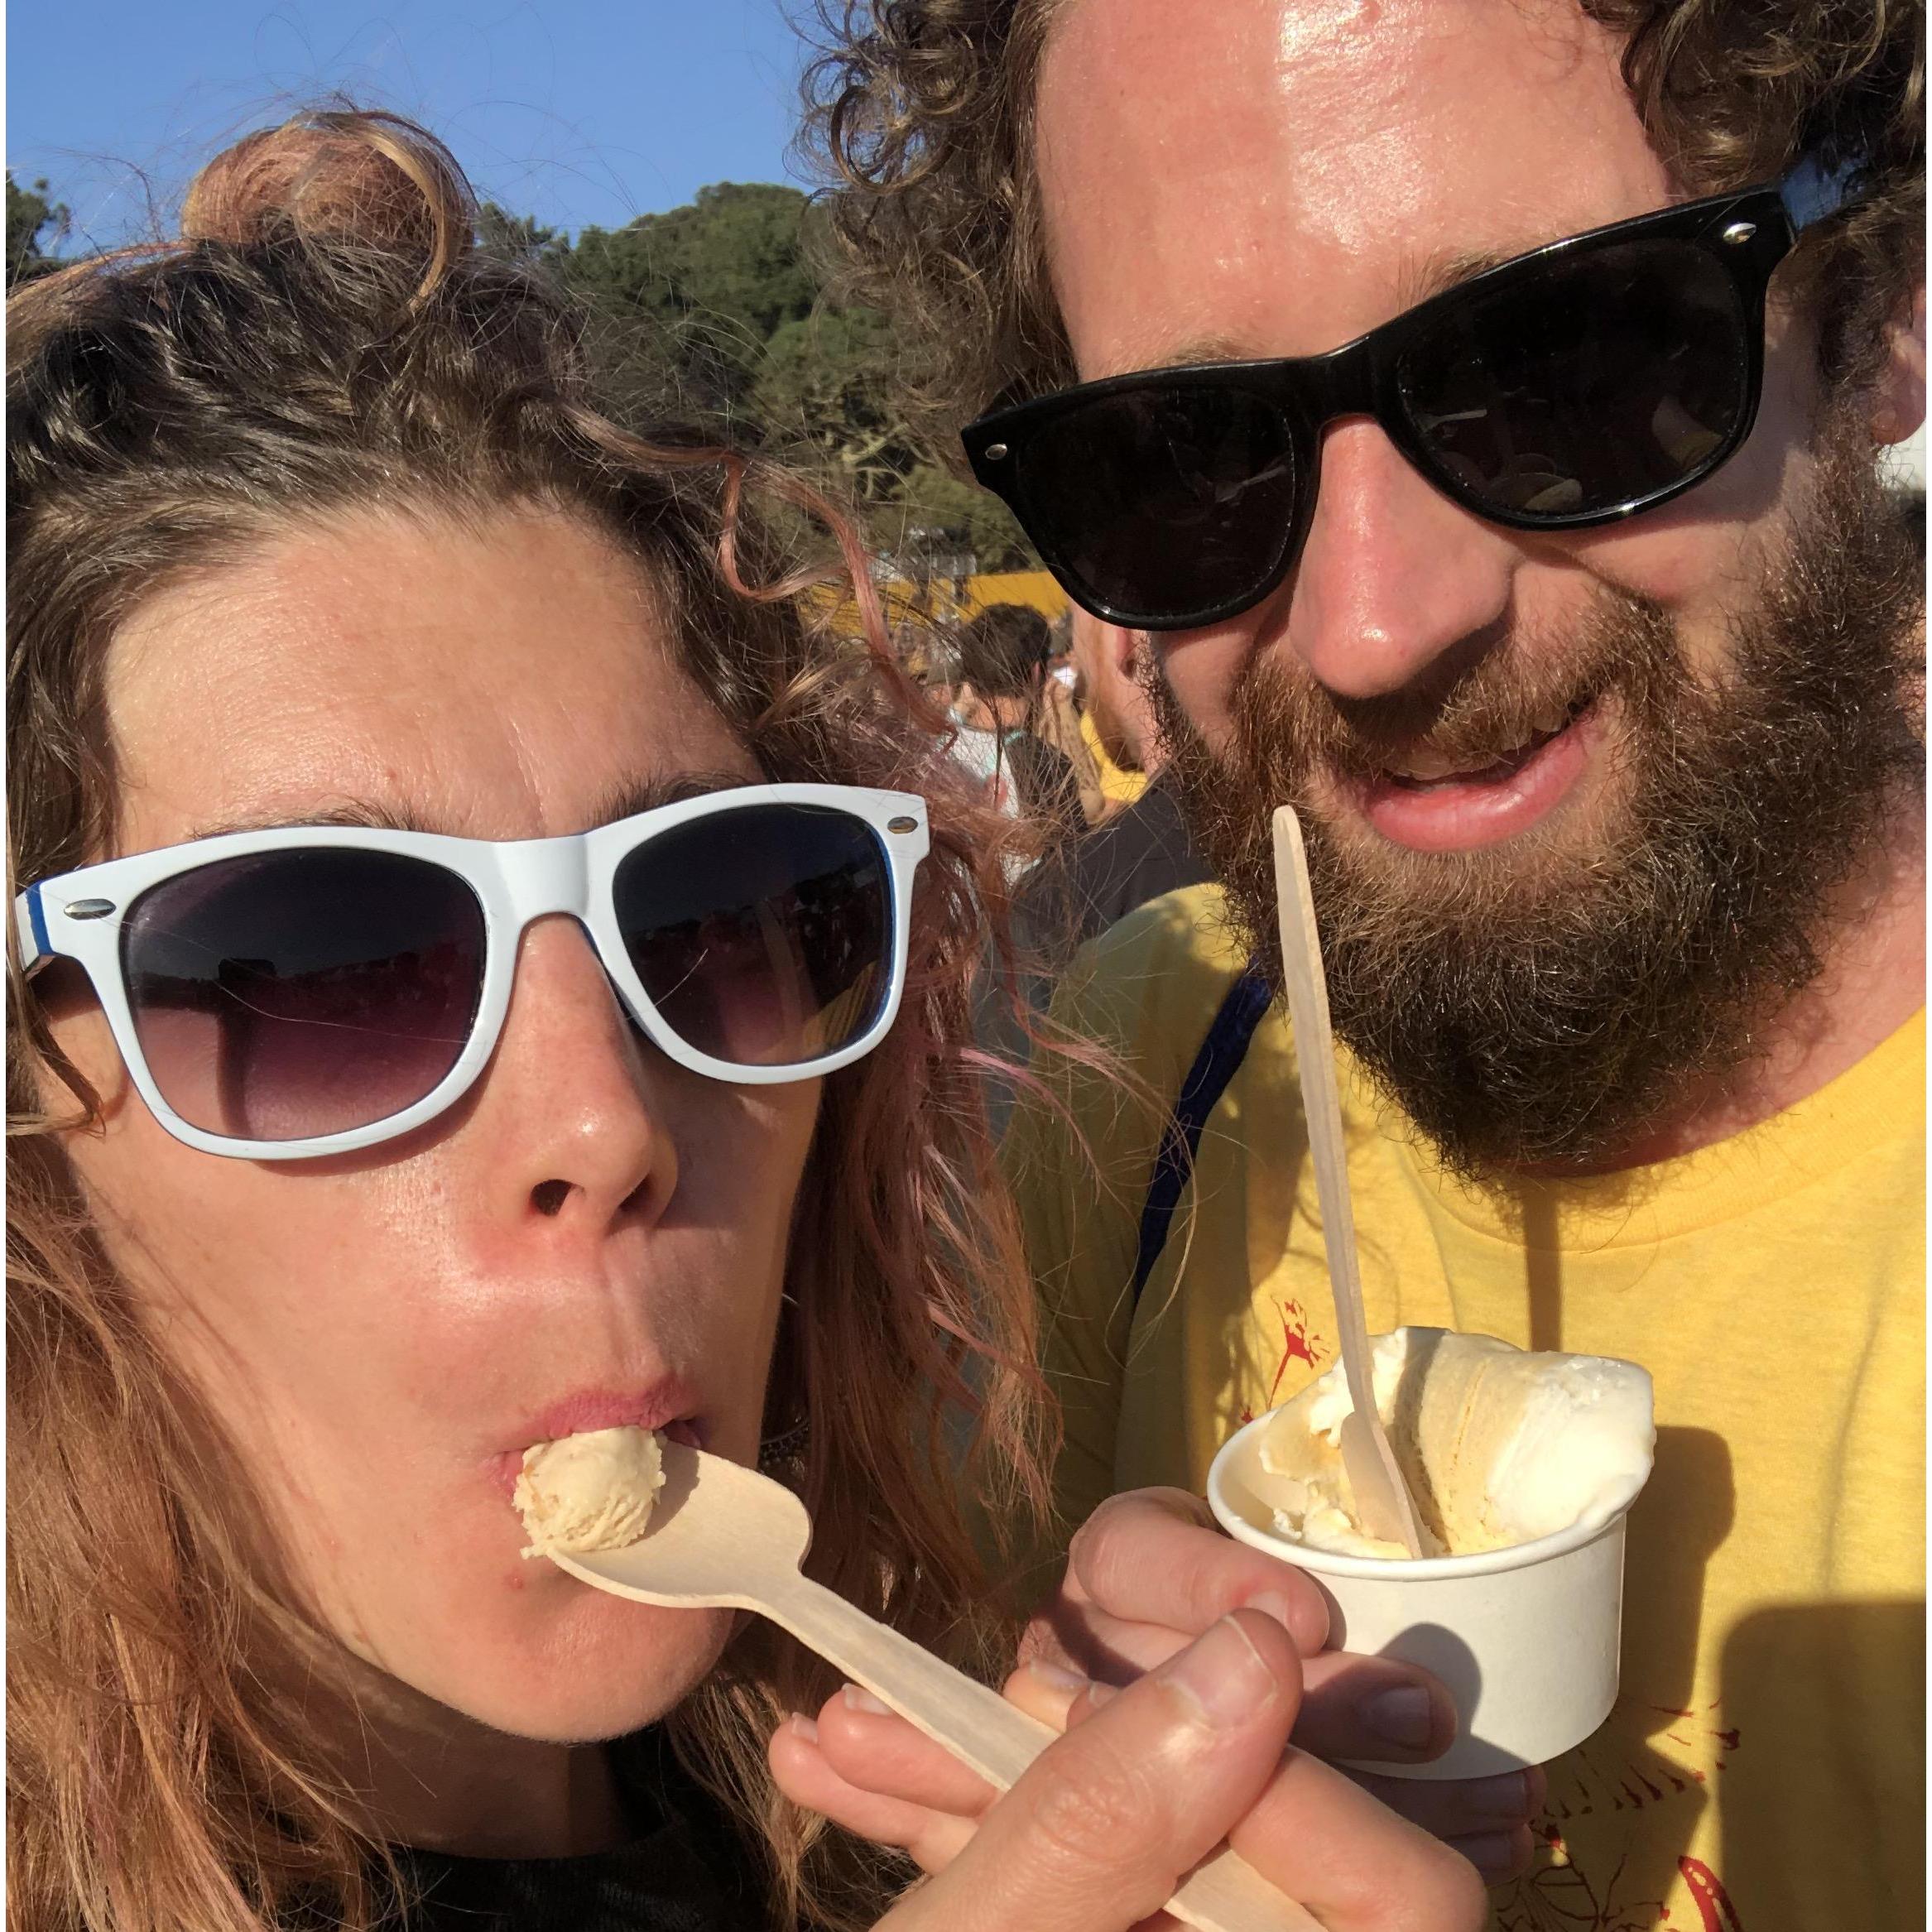 When we went a music festival for the free ice cream.